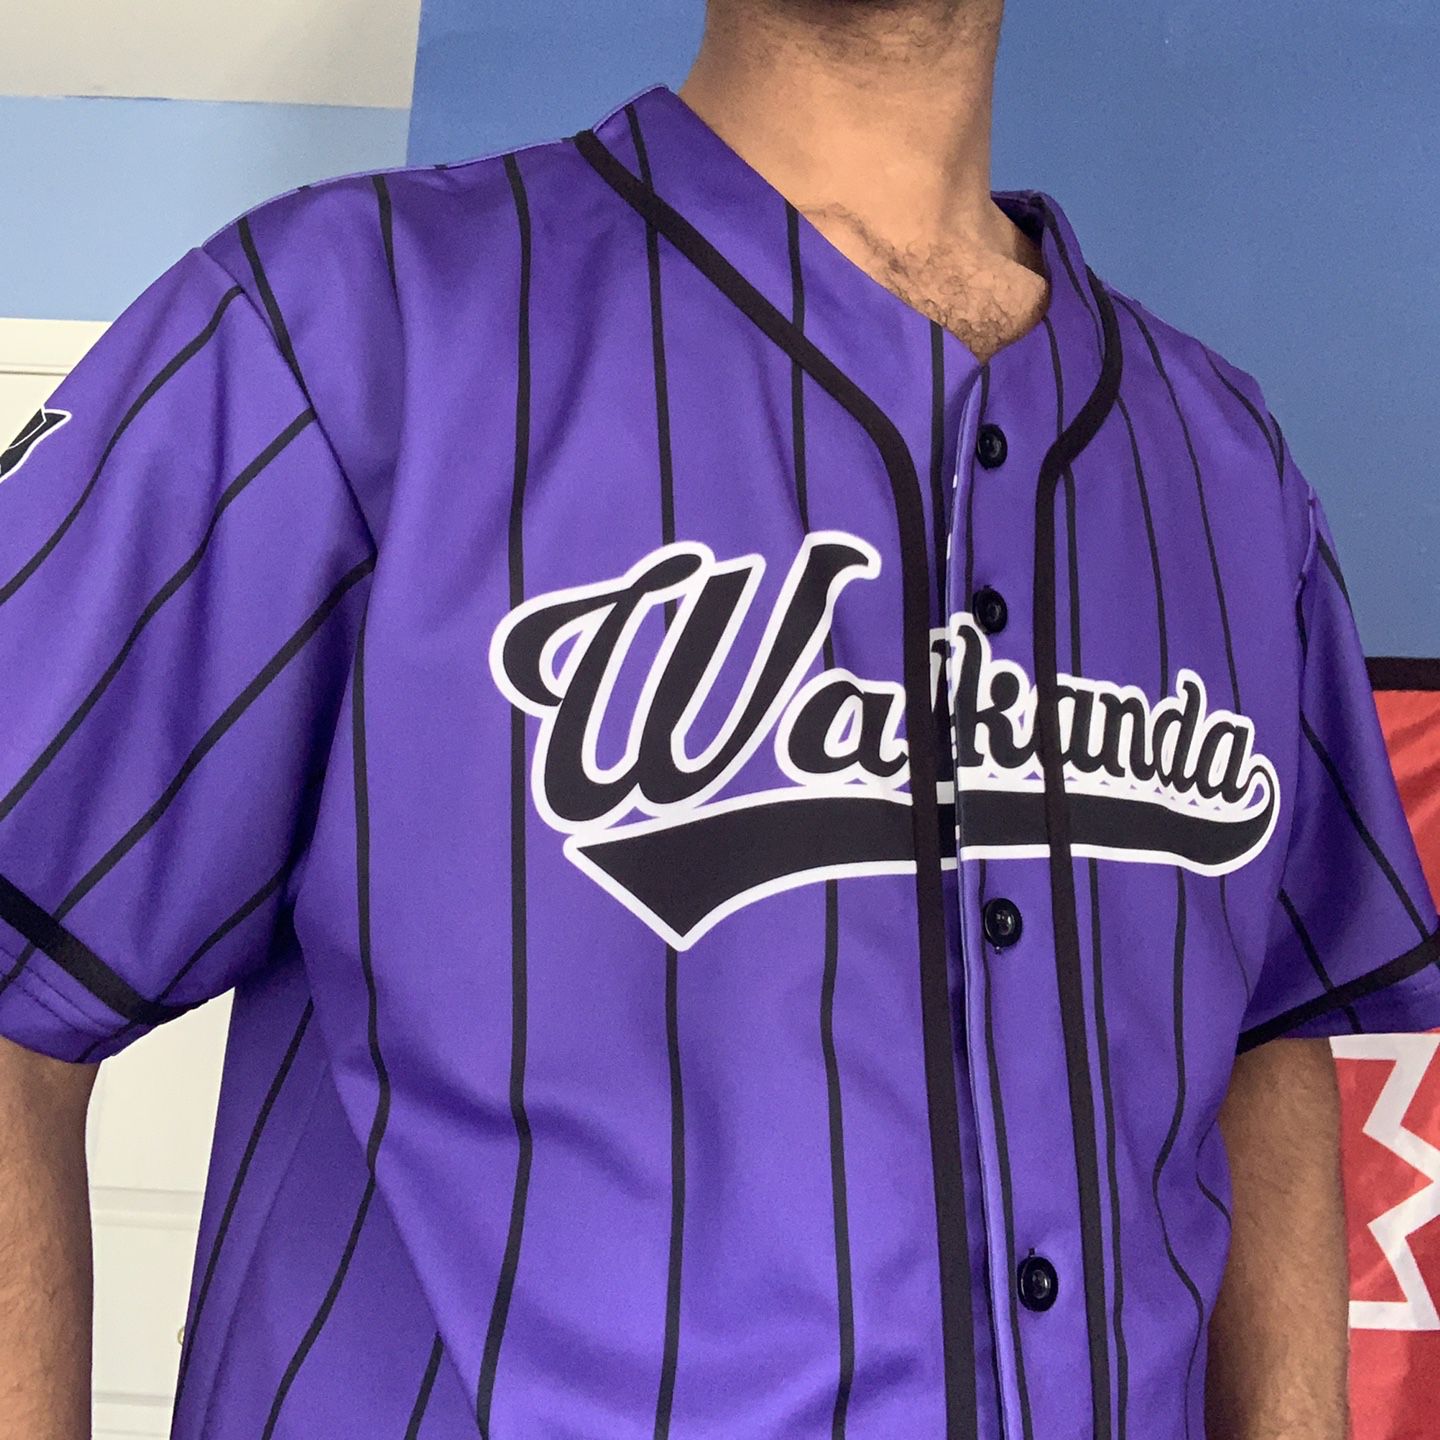 Wakanda Forever Black Panther Baseball Jersey for Sale in Port Tobacco, MD  - OfferUp